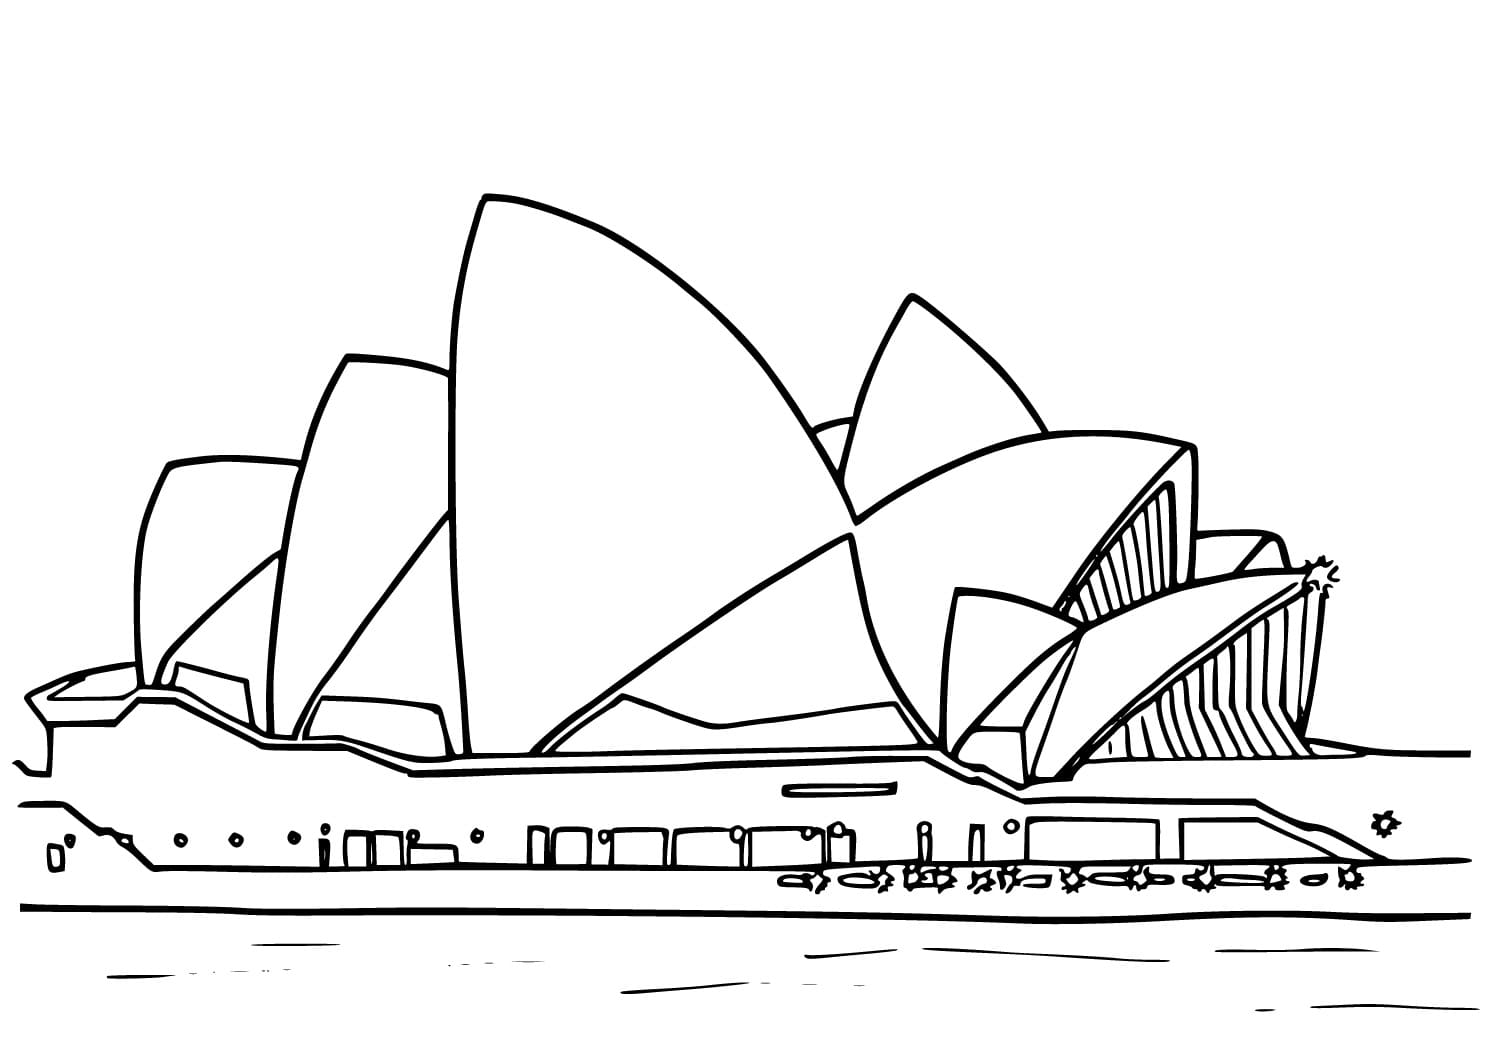 sydney-opera-house-in-australia-coloring-page-download-print-or